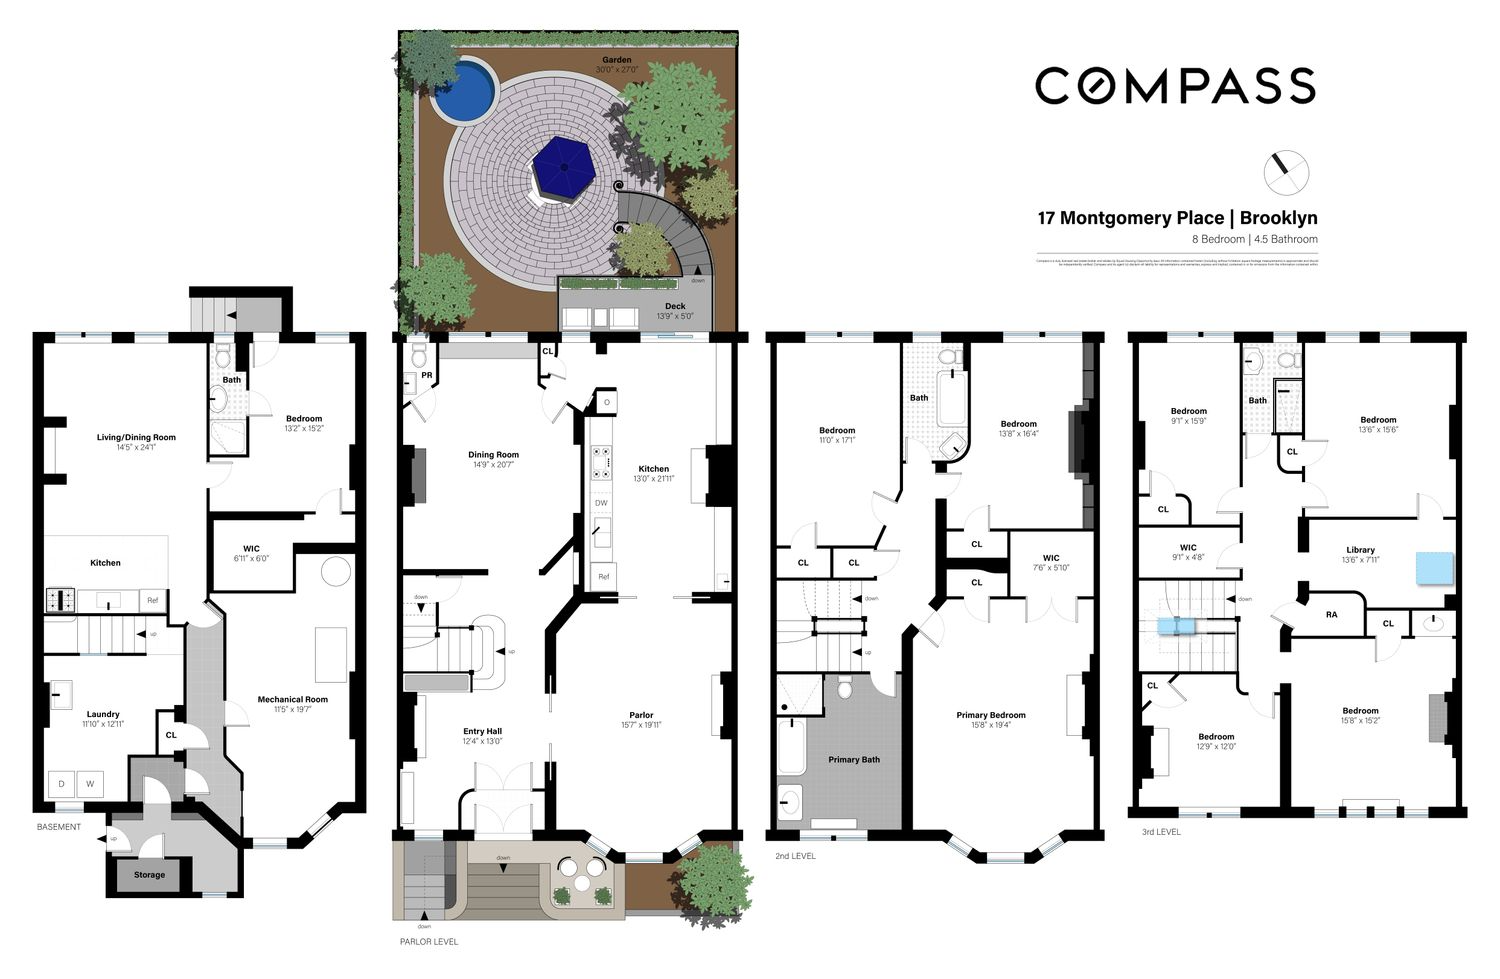 floor plan showing garden level apartment and three floors above